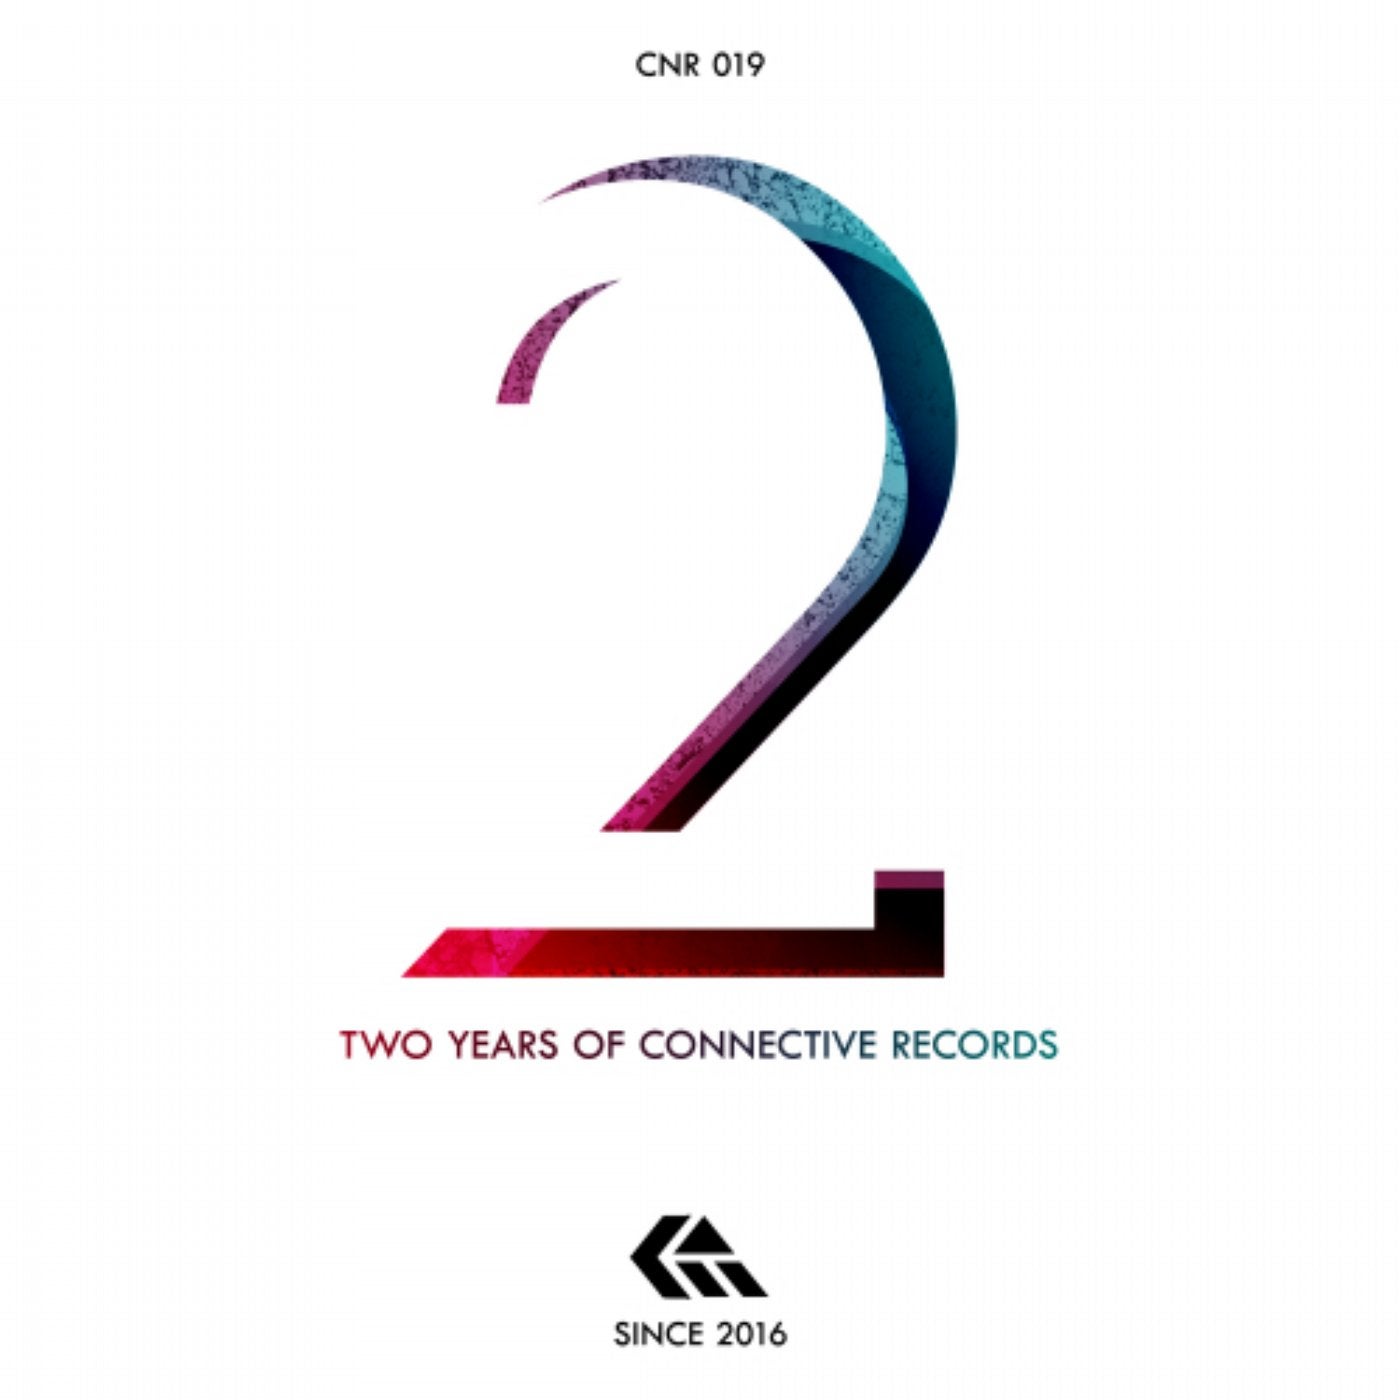 2 Years Of Connective Records